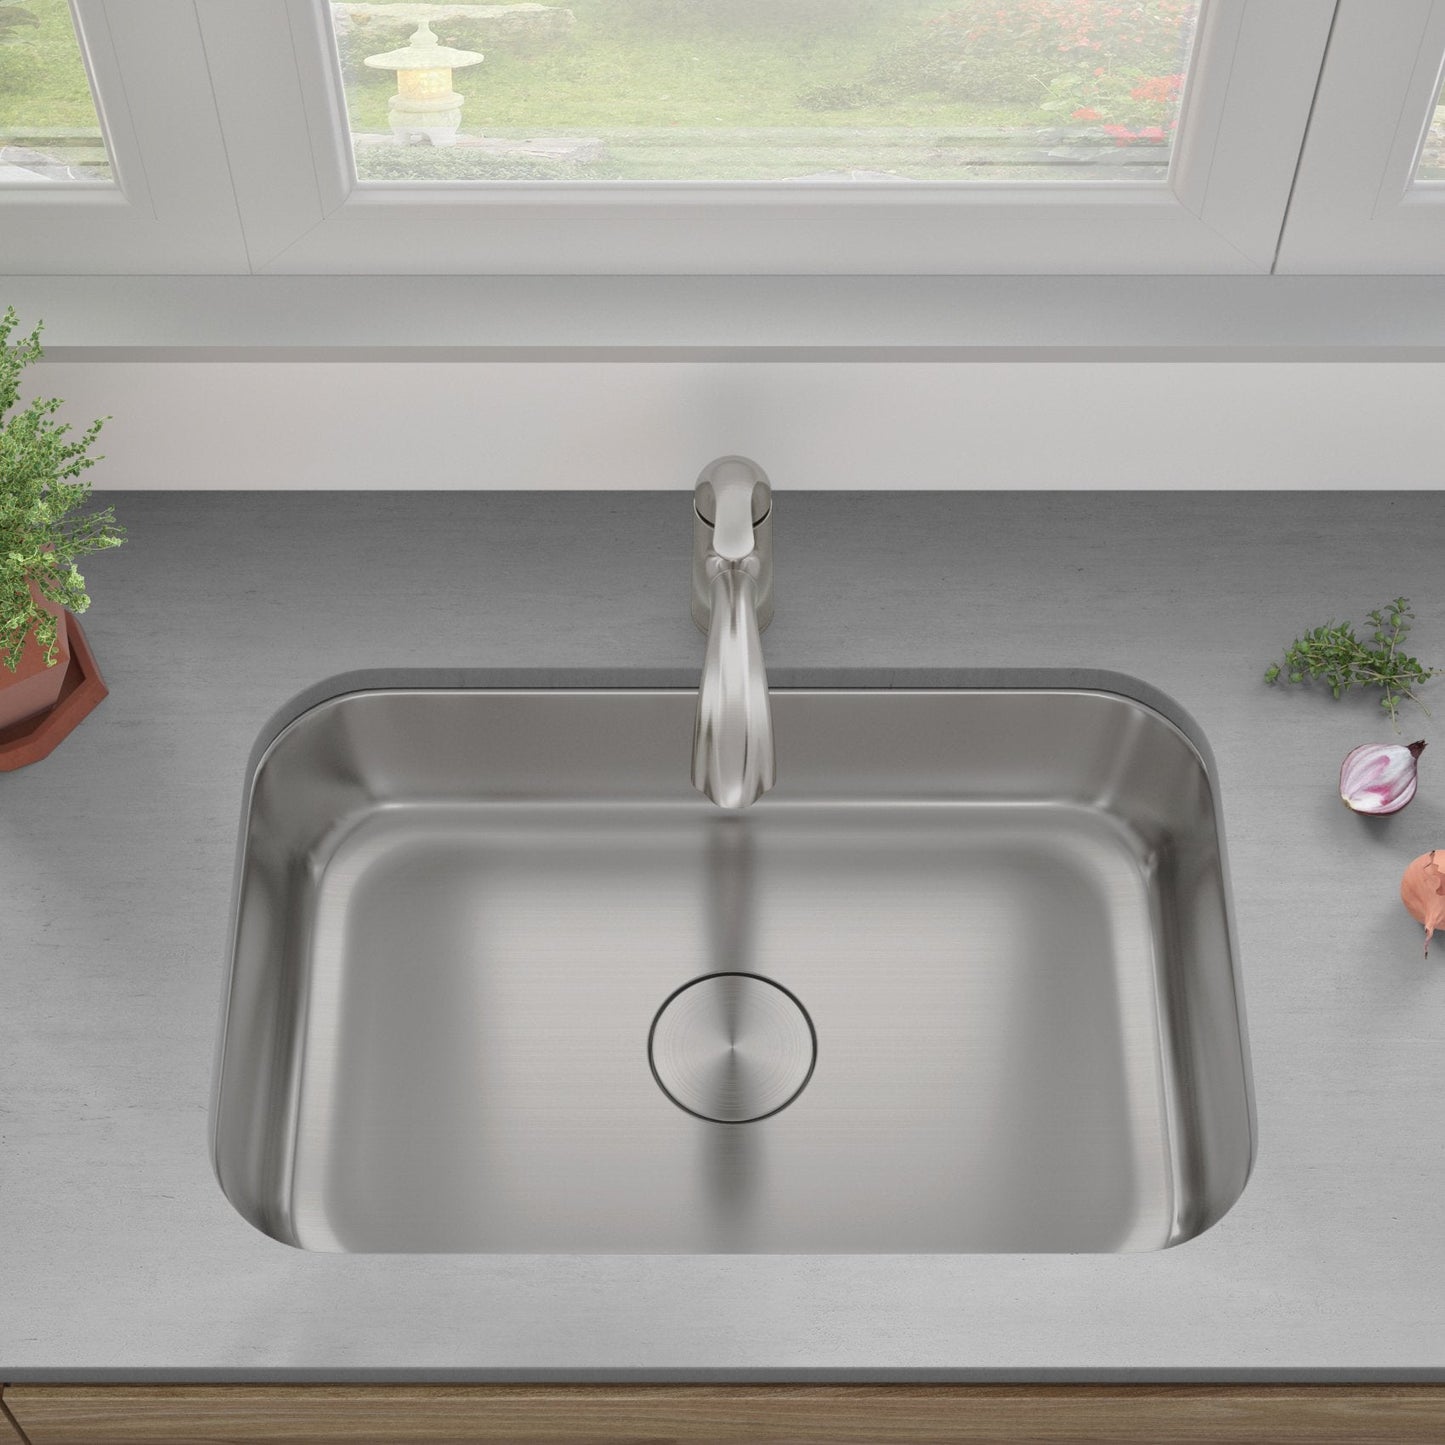 Allora USA 27" L x 18" W ADA Compliant Single Bowl Stainless Steel Undermount Kitchen Sink With Basket Strainer